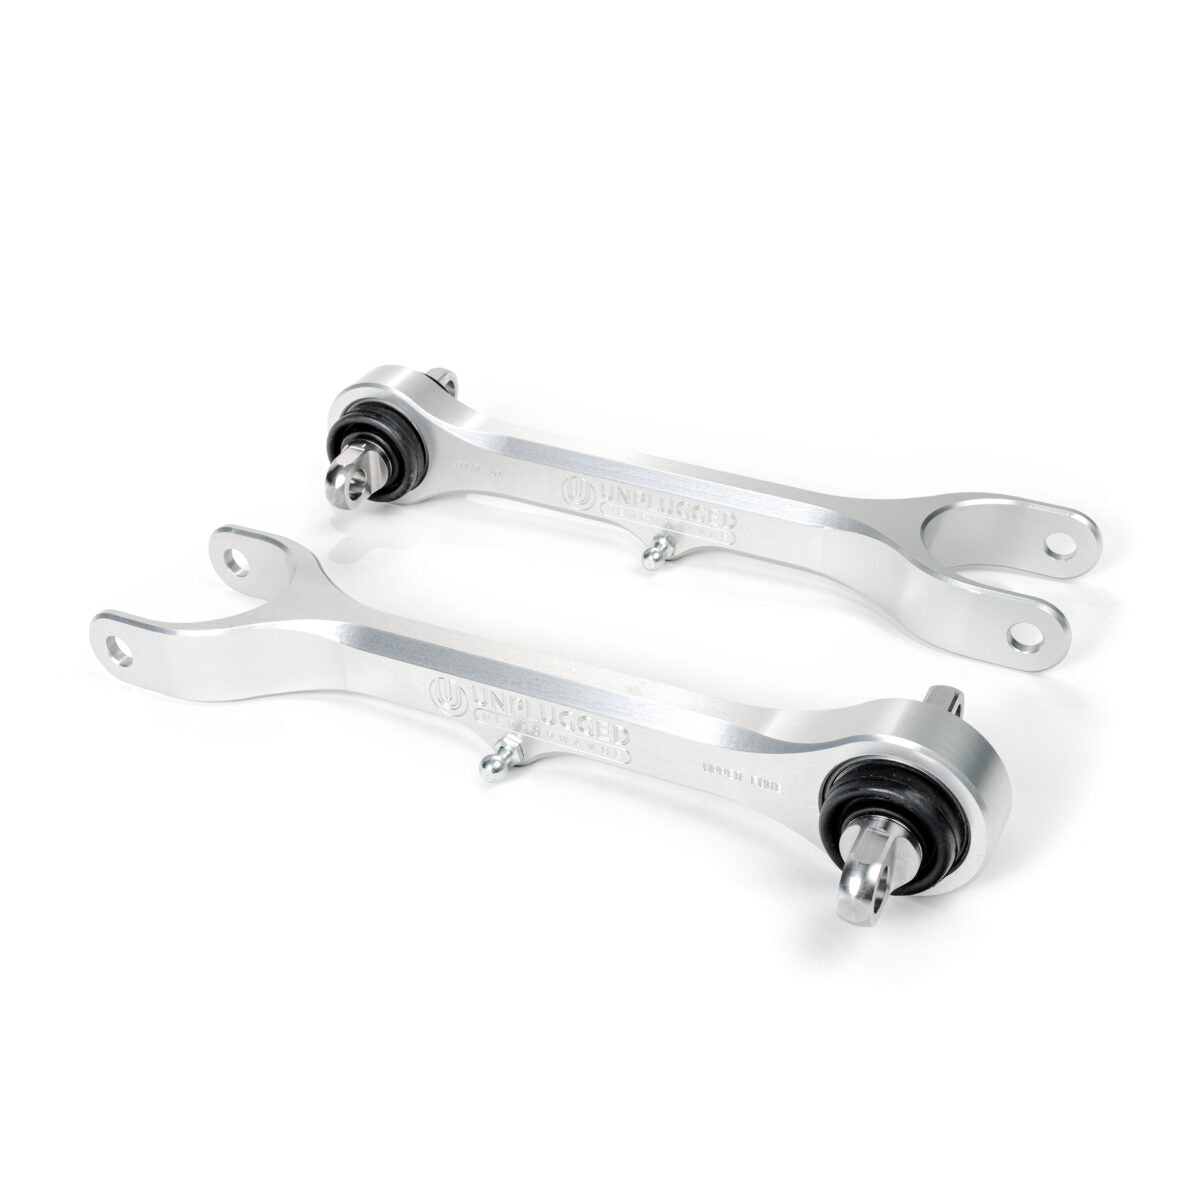 Unplugged Performance - Model S/X Plaid Billet Rear Traction Arm Set (Upper Front Link)